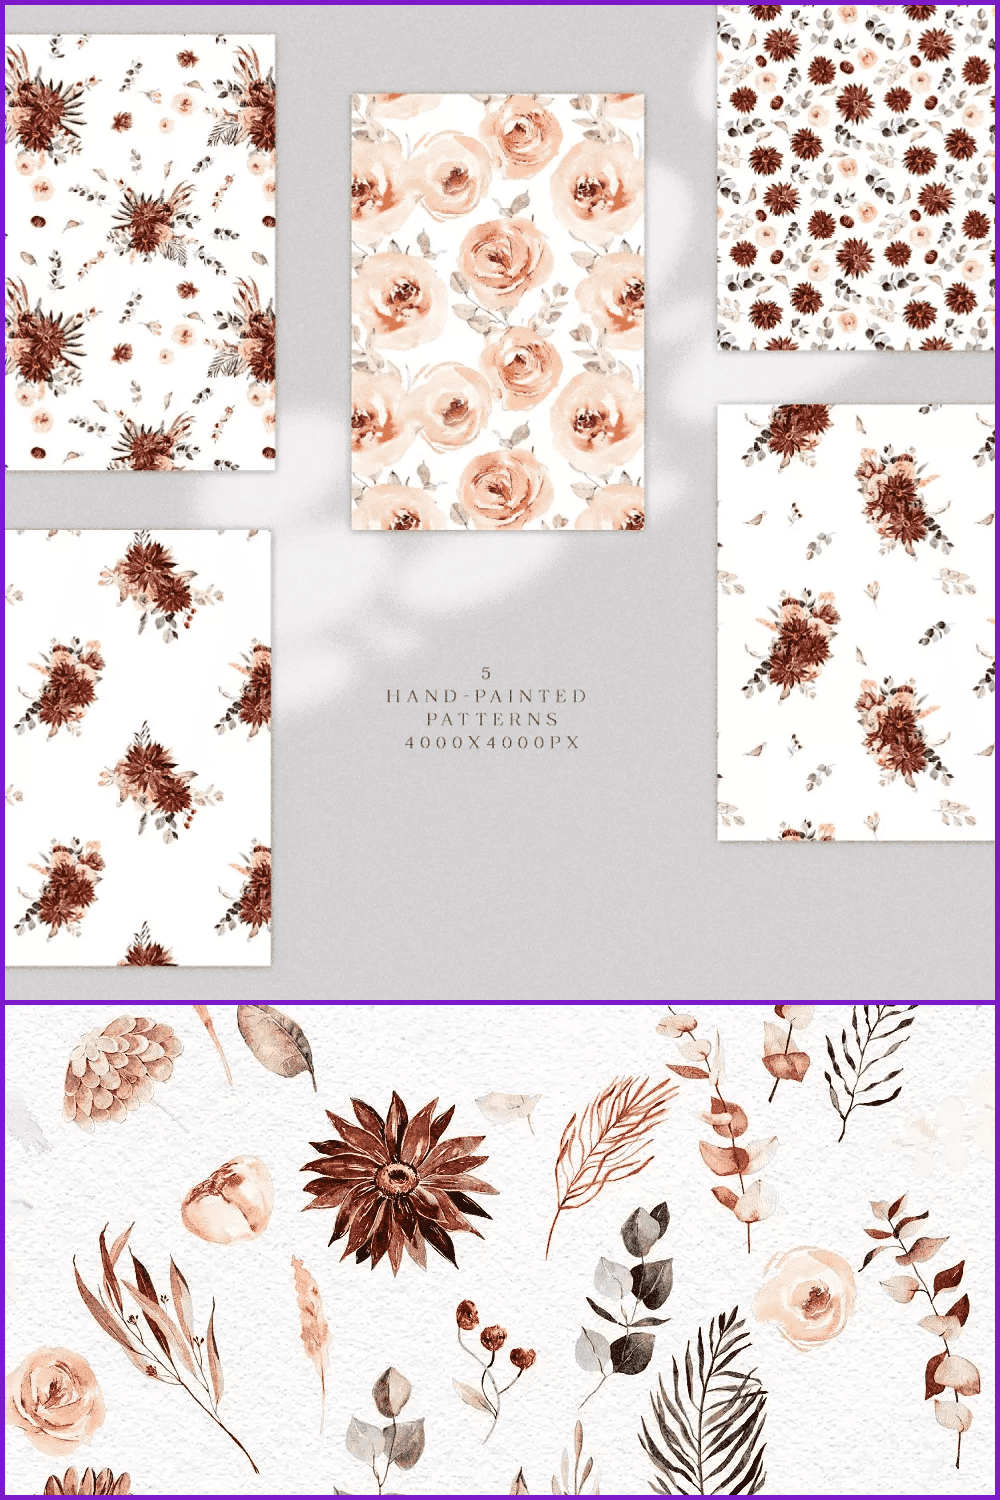 Collage of flower patterns in brown colors.